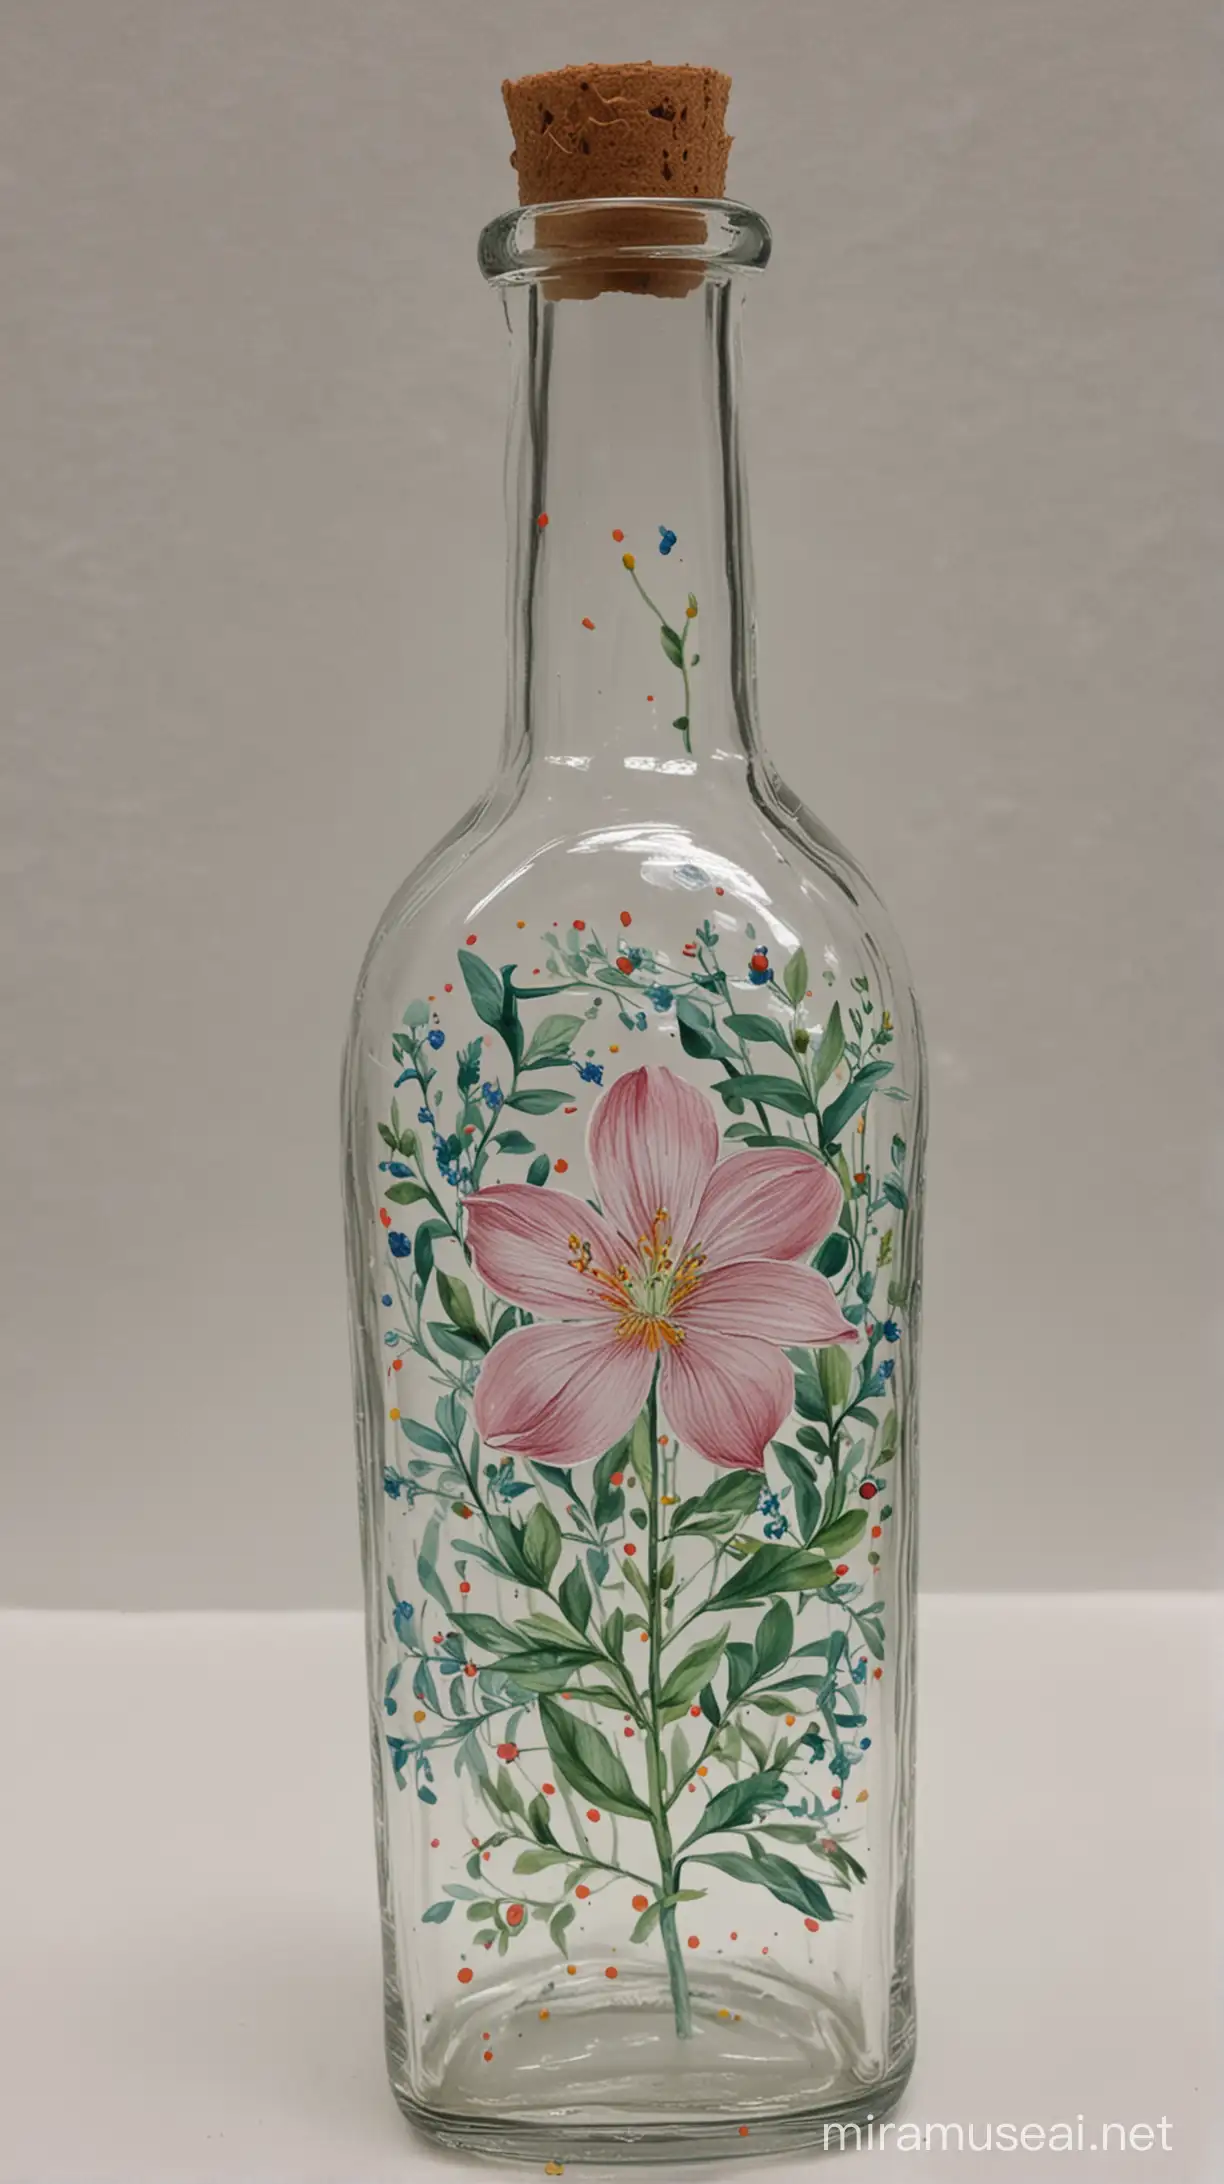 A very simple hand painted bottle